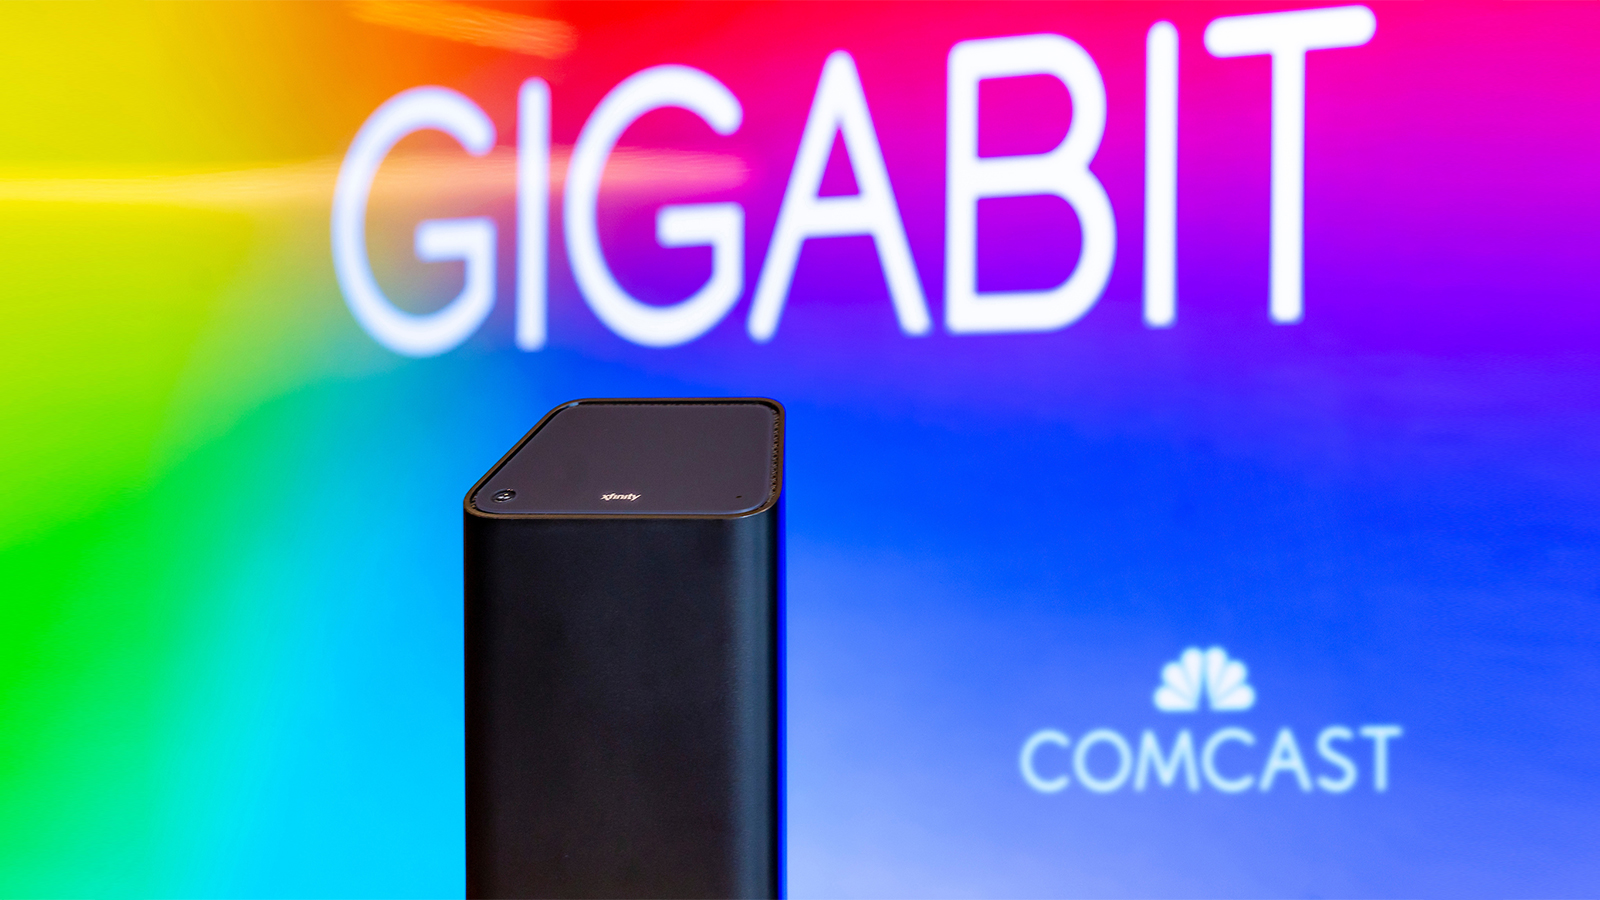 An Xfinity xFi gateway displayed in front of the Comcast logo.